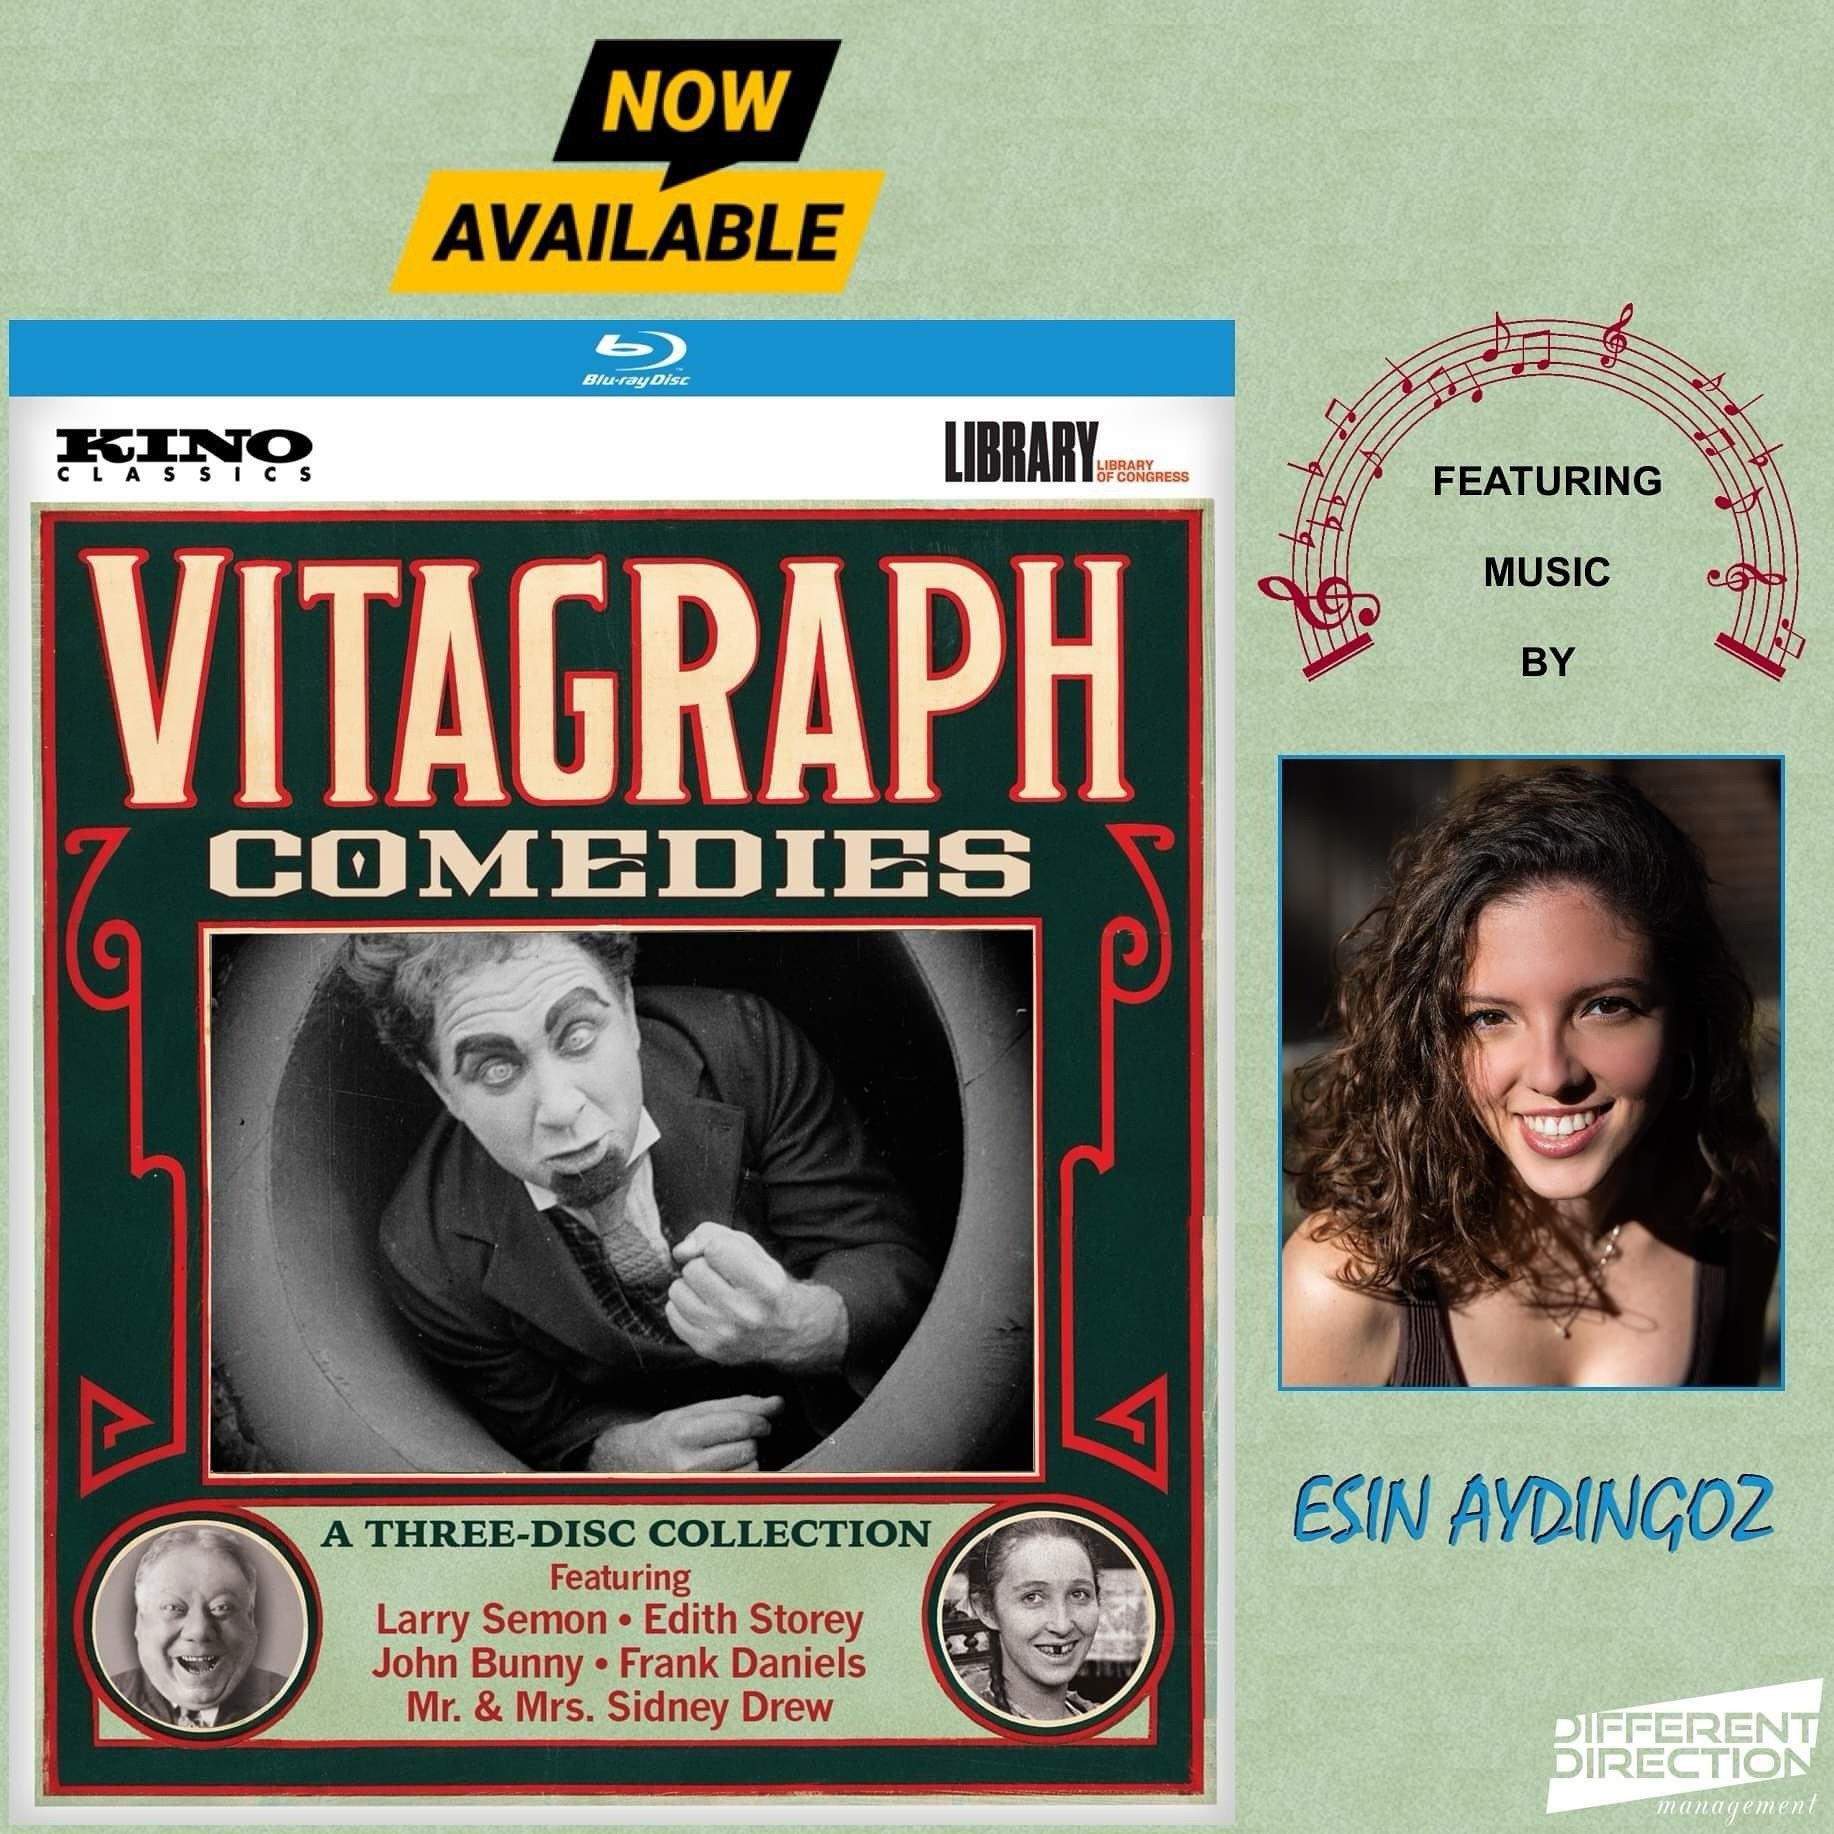 Happy release day, Esin!

You may want to check out this new Blu-ray release as it includes the short &ldquo;A Case of Eugenics&rdquo;, which was brilliant scored by our Grammy nominated client, @esinaydingoz! Around 40 classic silent films are inclu